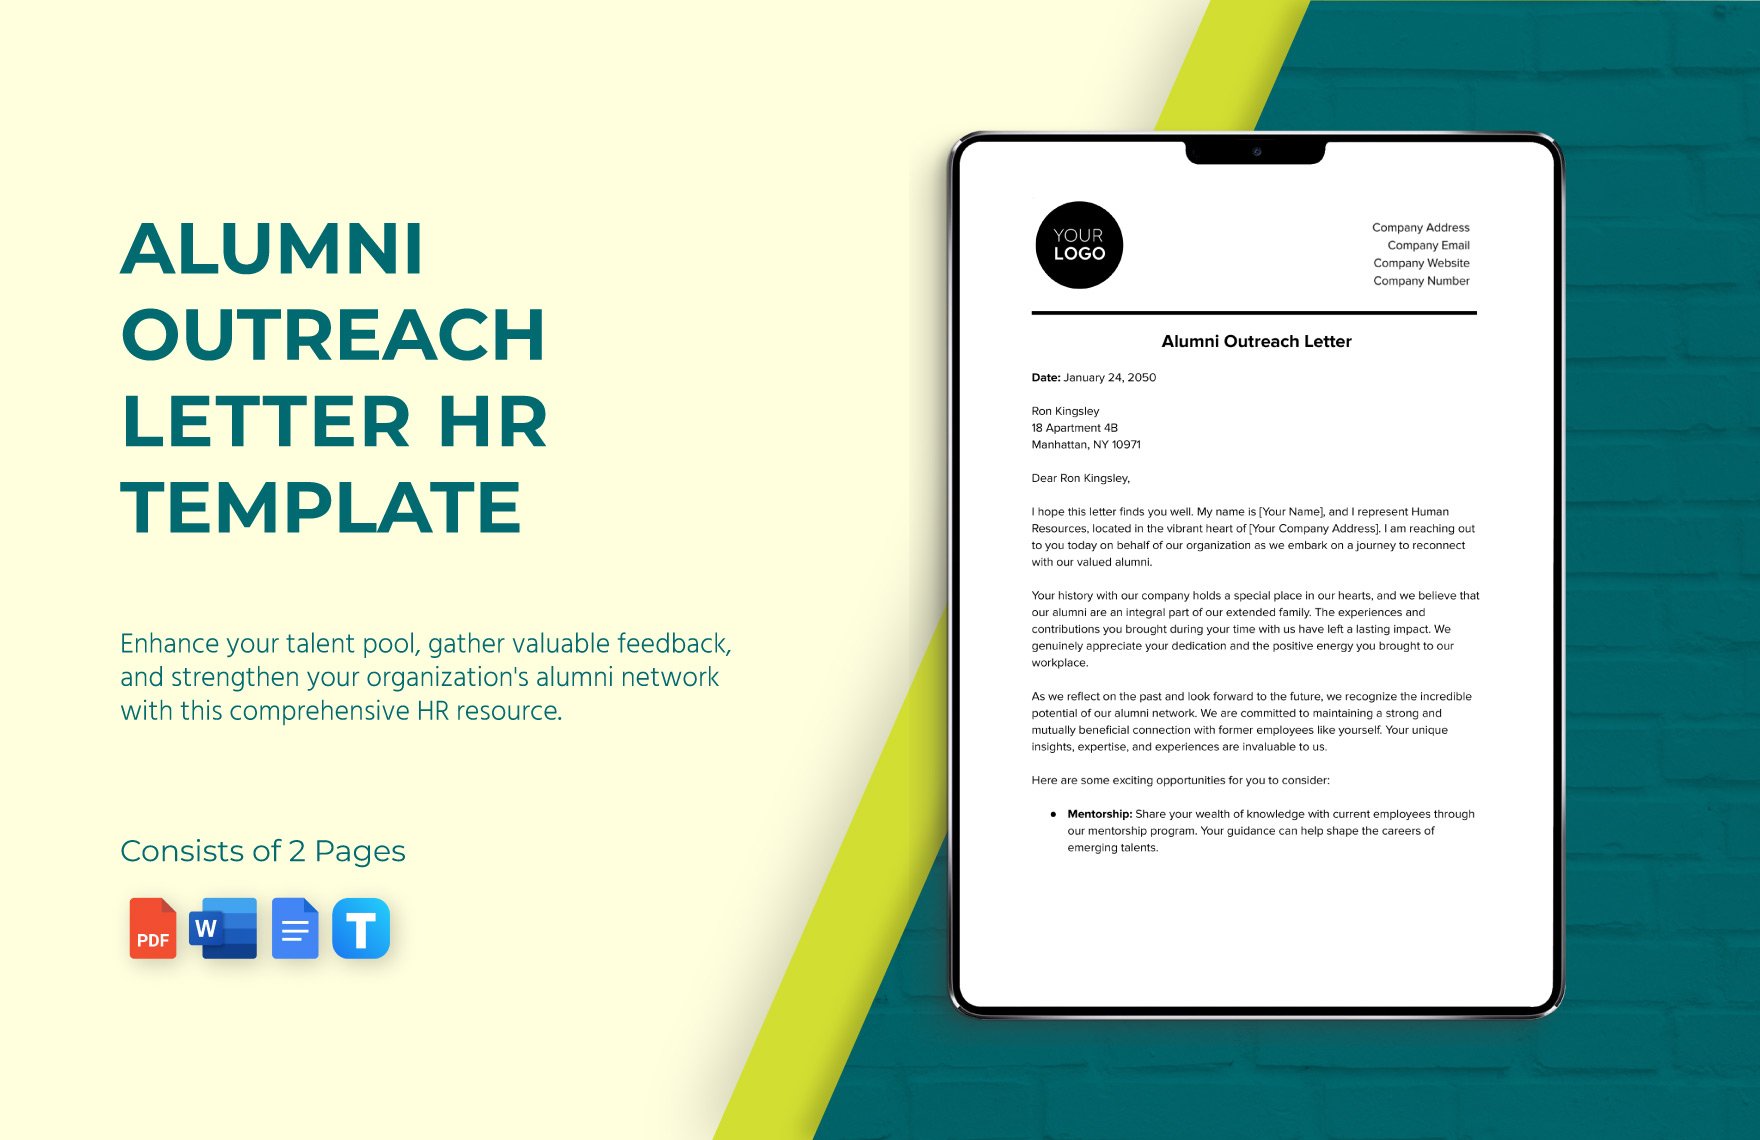 Alumni Outreach Letter HR Template in Word, Google Docs, PDF